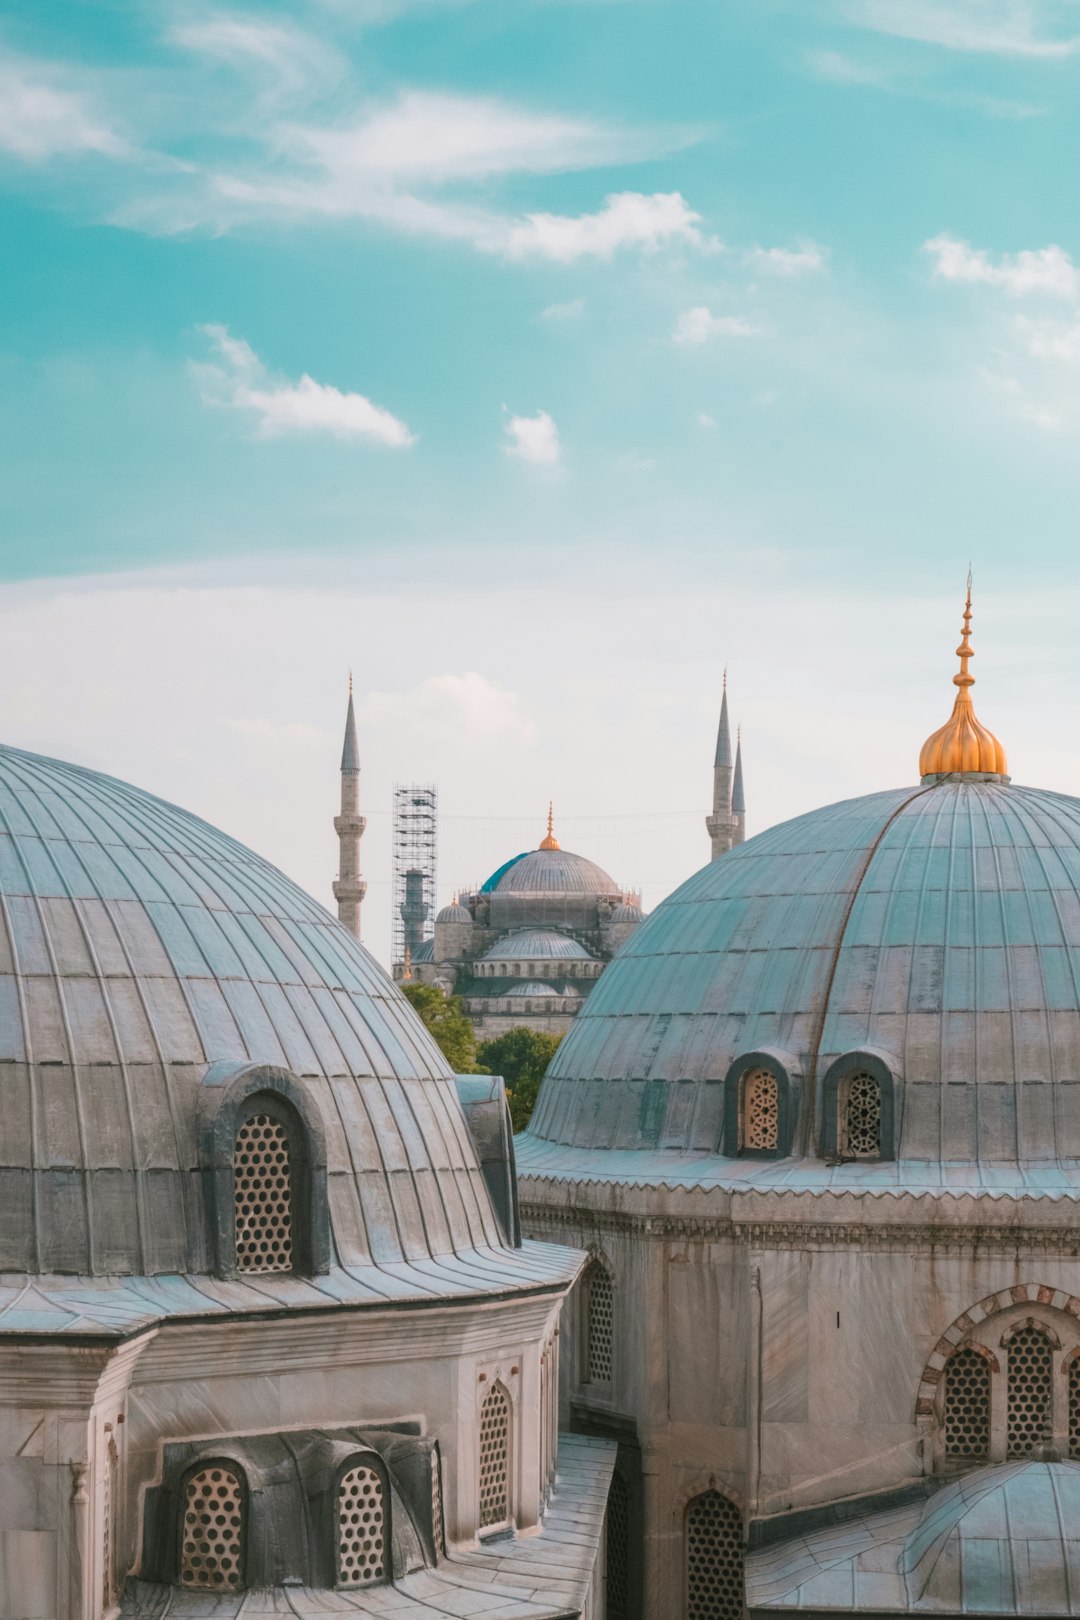 Travel Tips and Stories of The Blue Mosque in Turkey